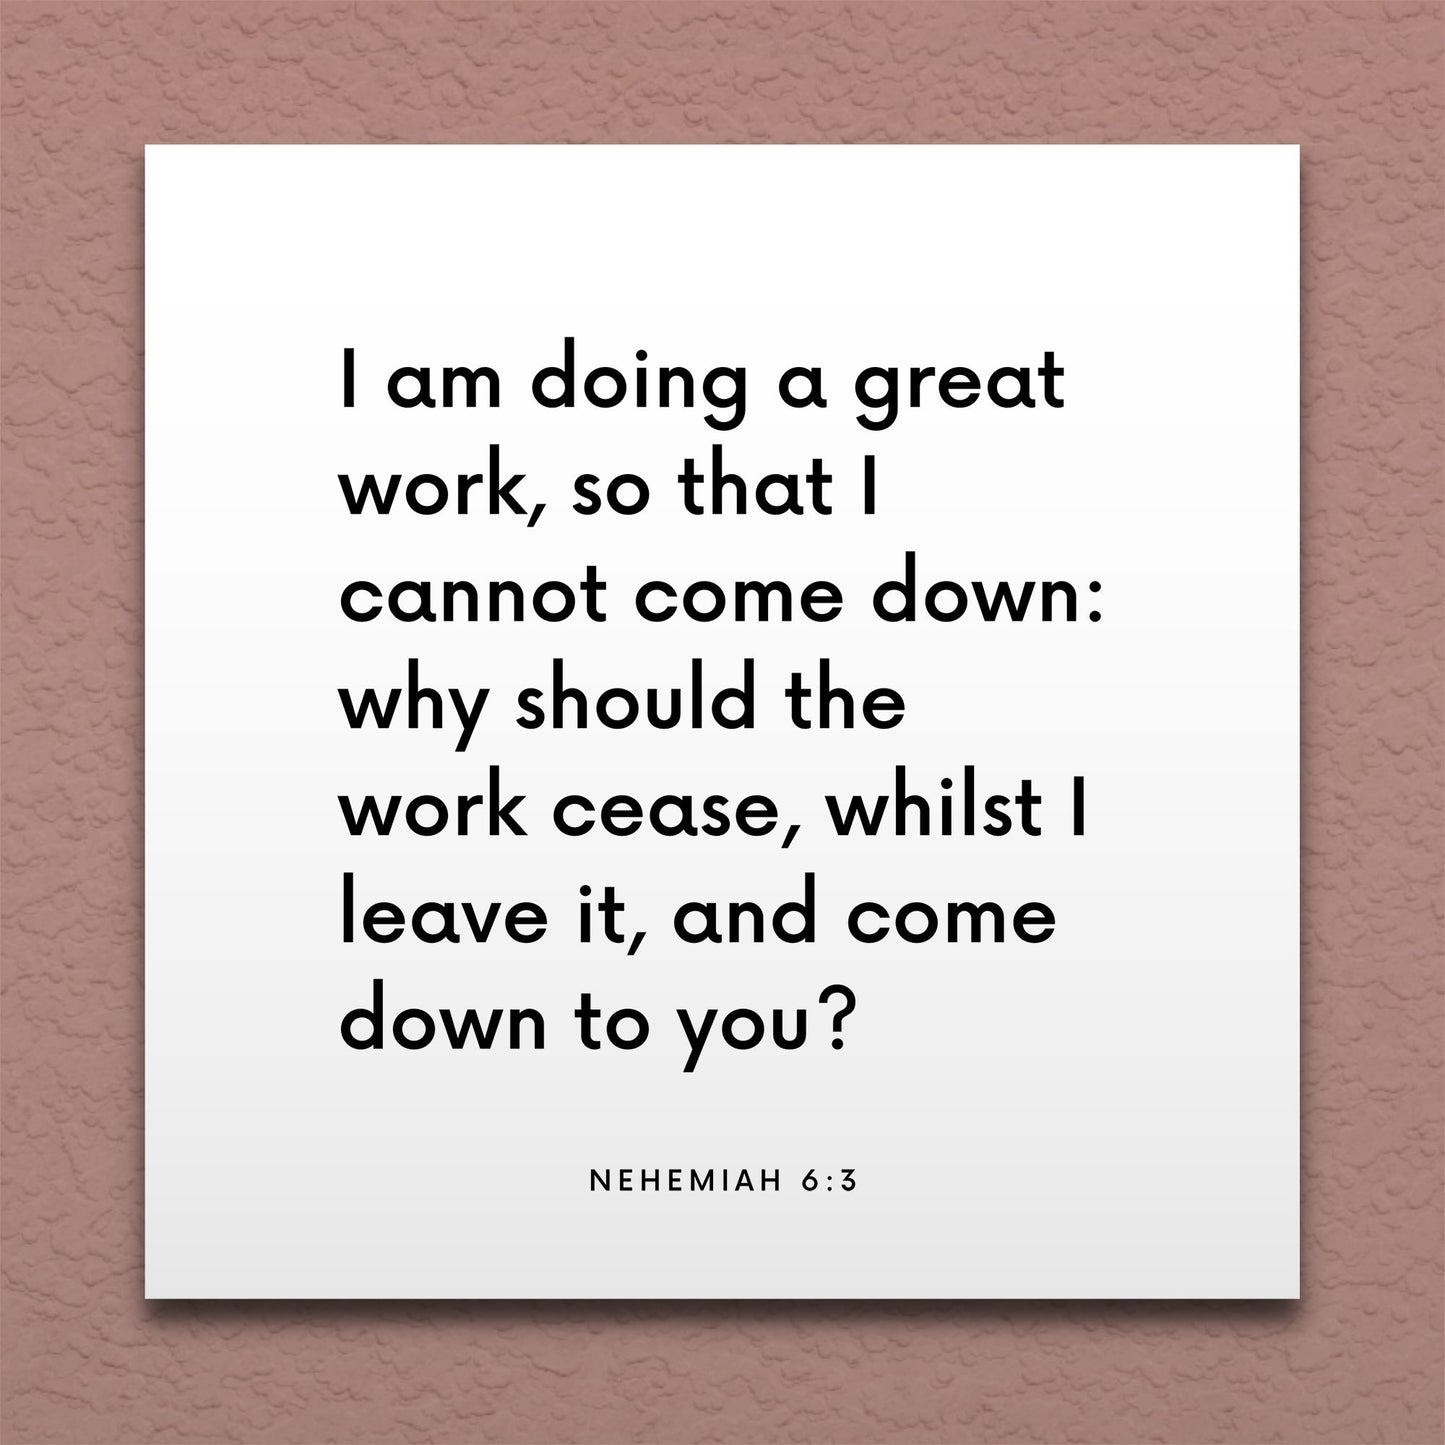 Wall-mounted scripture tile for Nehemiah 6:3 - "I am doing a great work, so that I cannot come down"